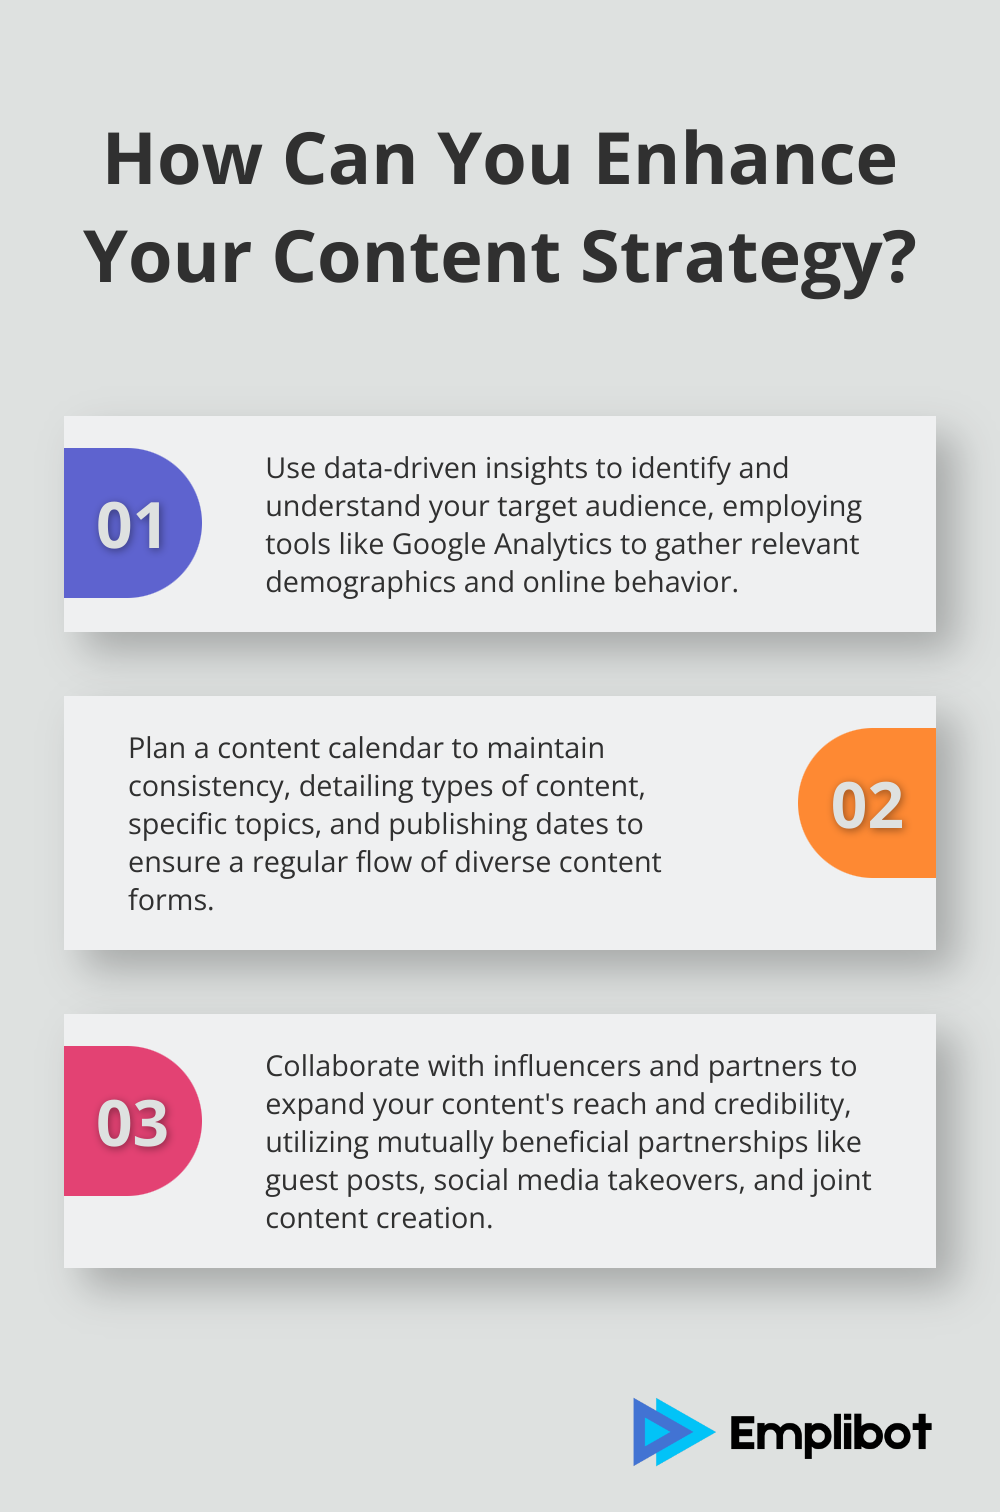 Fact - How Can You Enhance Your Content Strategy?